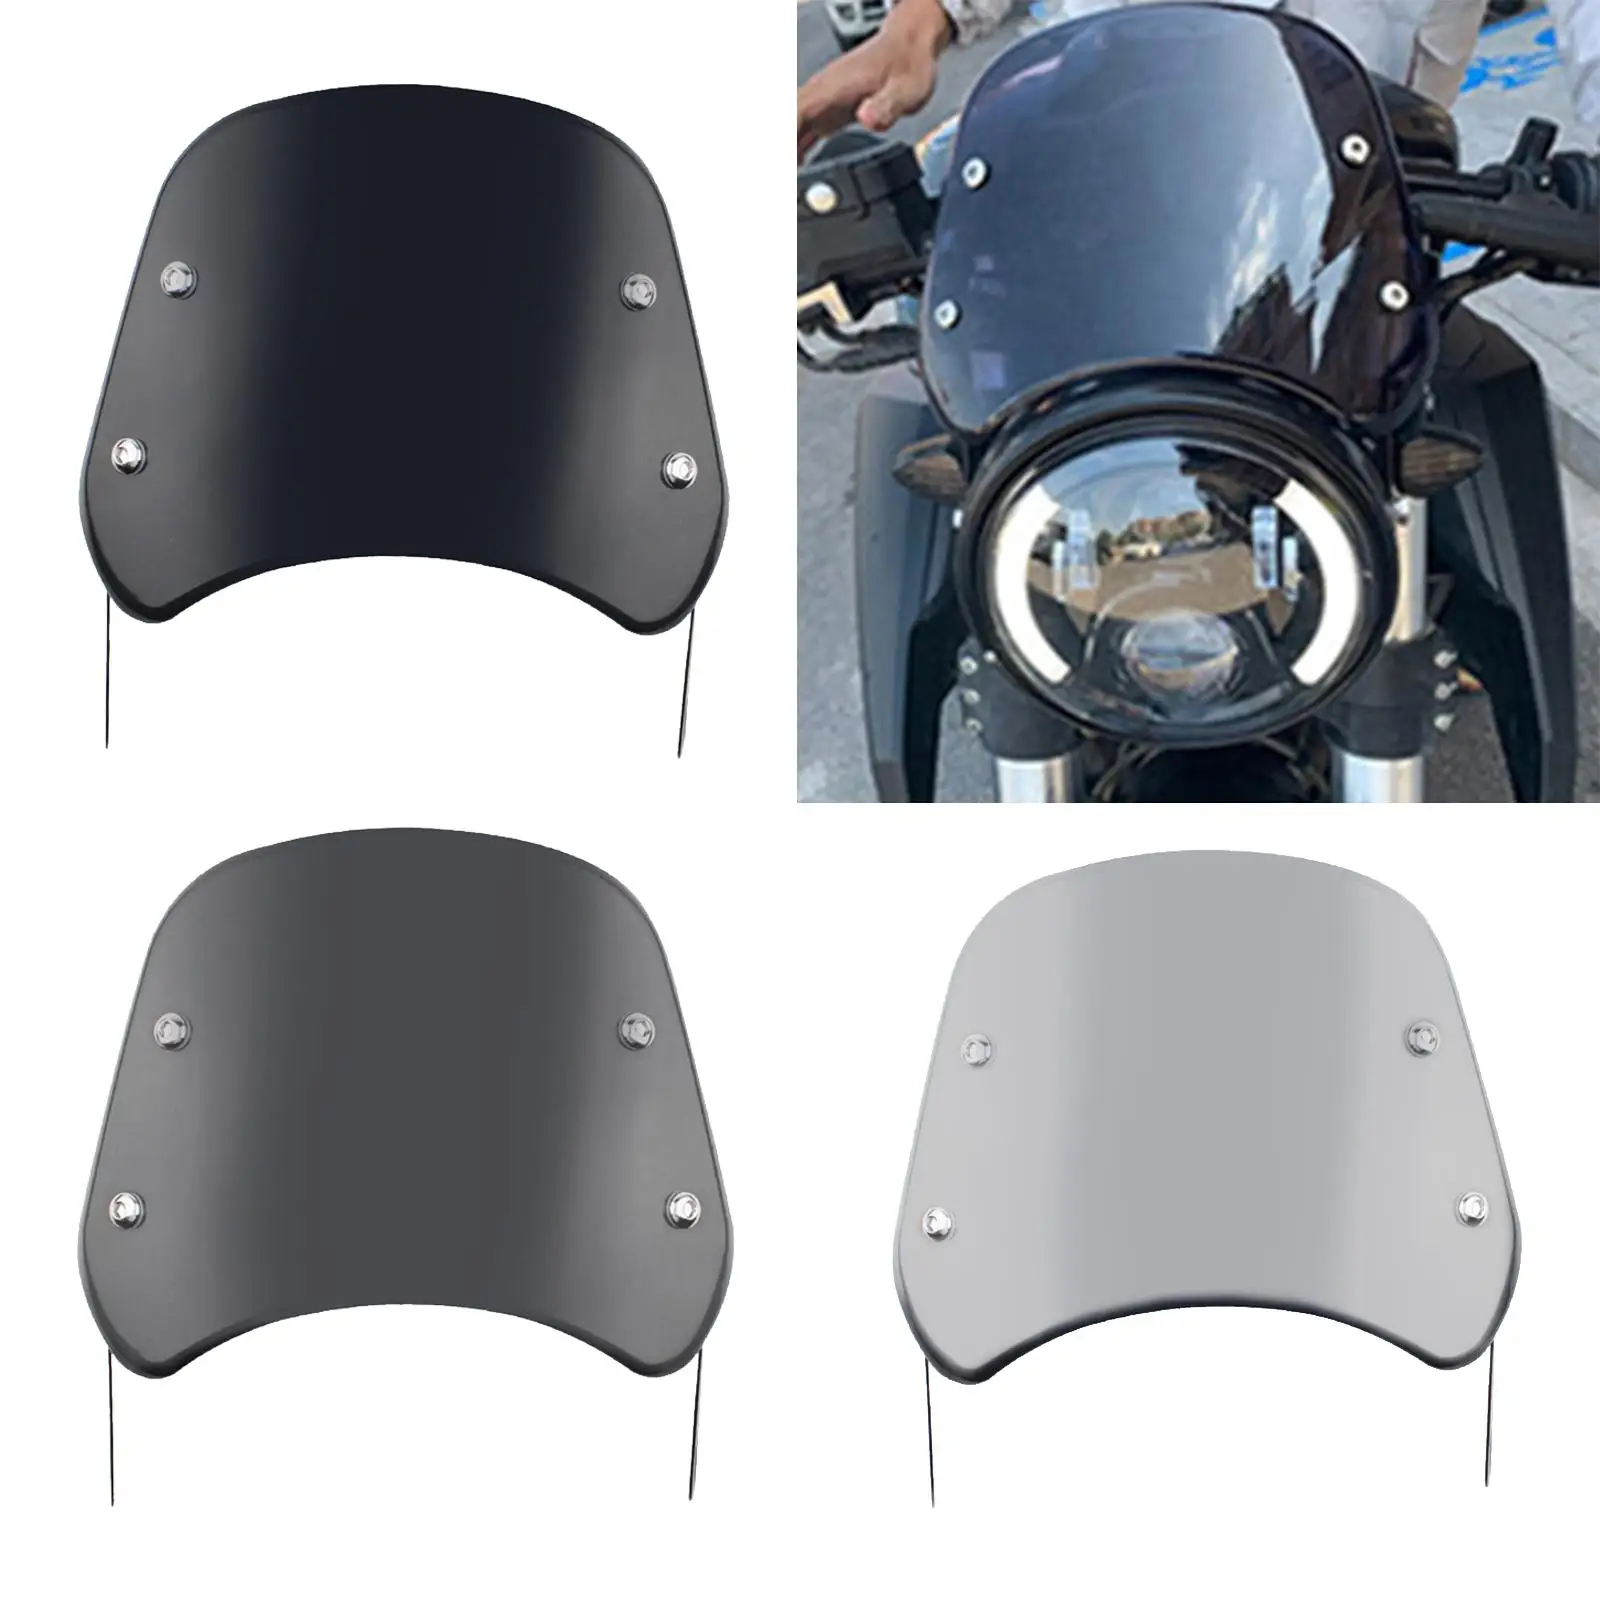 Front 5-7 inch Motorcycle Headlight Windshield, Wind Deflector Windscreen for Motorbike Compact Replacement accessories